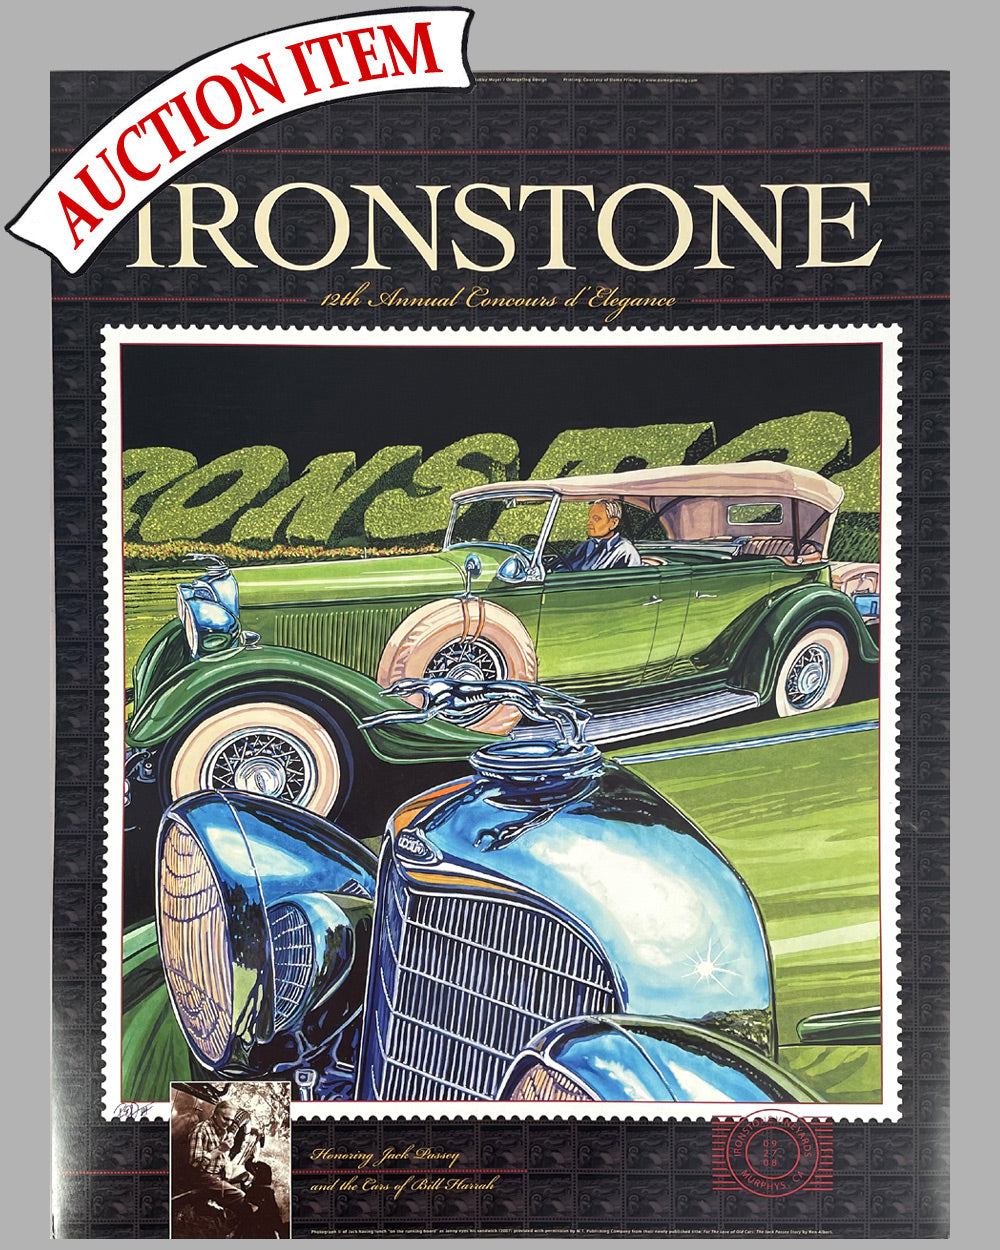 Ironstone Concours d’Elegance 2008 poster by Roy Dryer